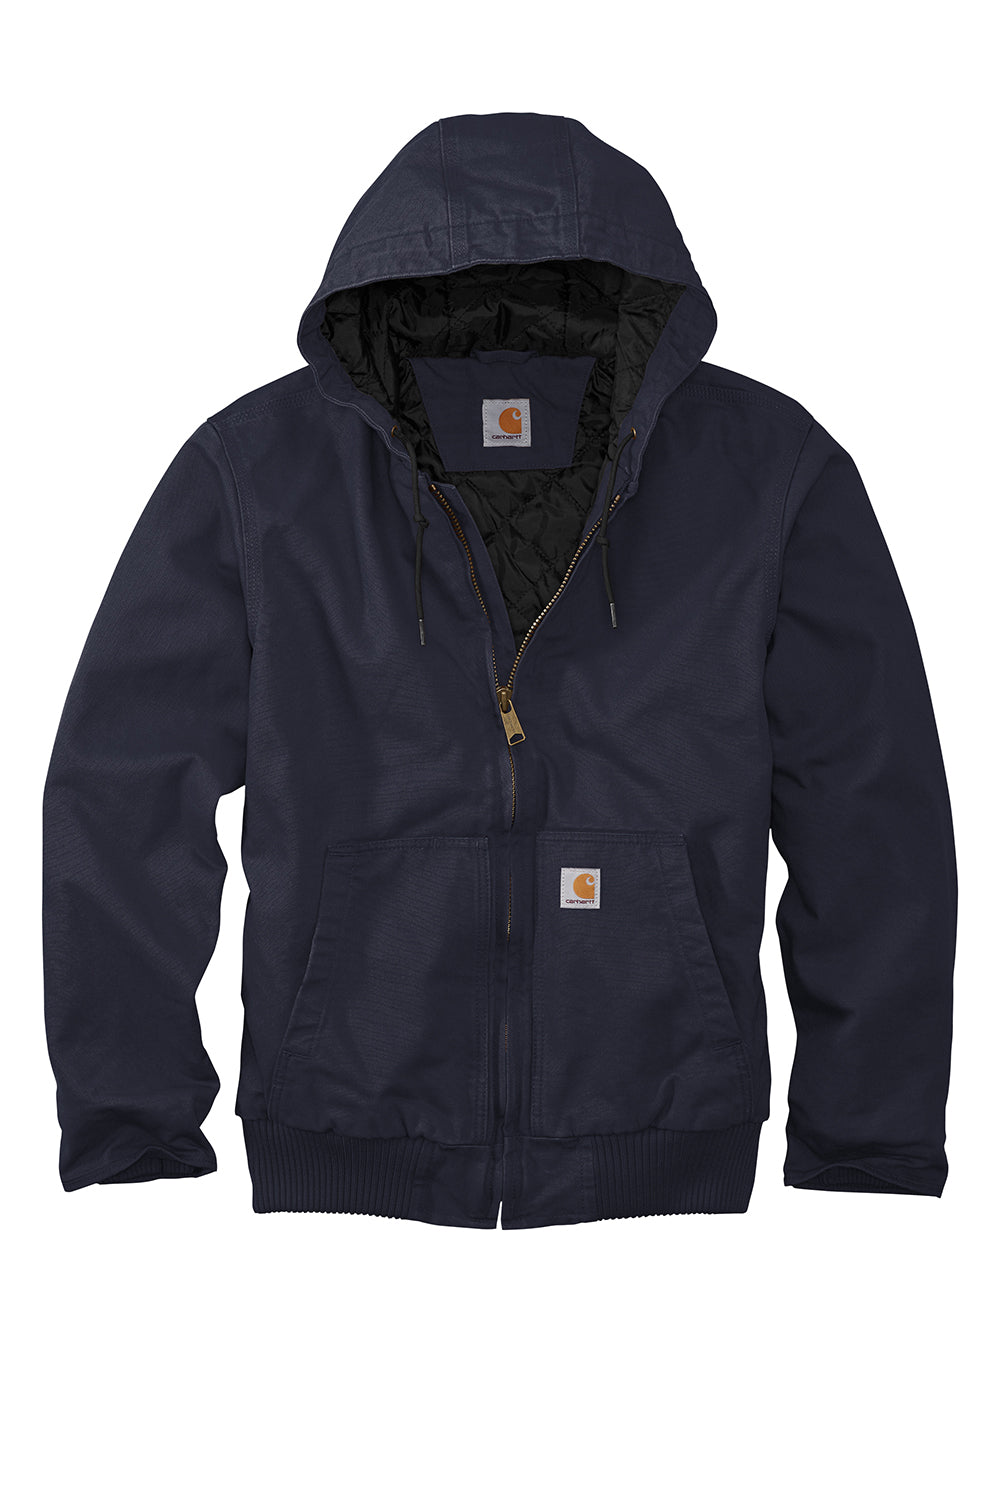 Carhartt CT104050/CTT104050 Mens Active Washed Duck Full Zip Hooded Jacket Navy Blue Flat Front